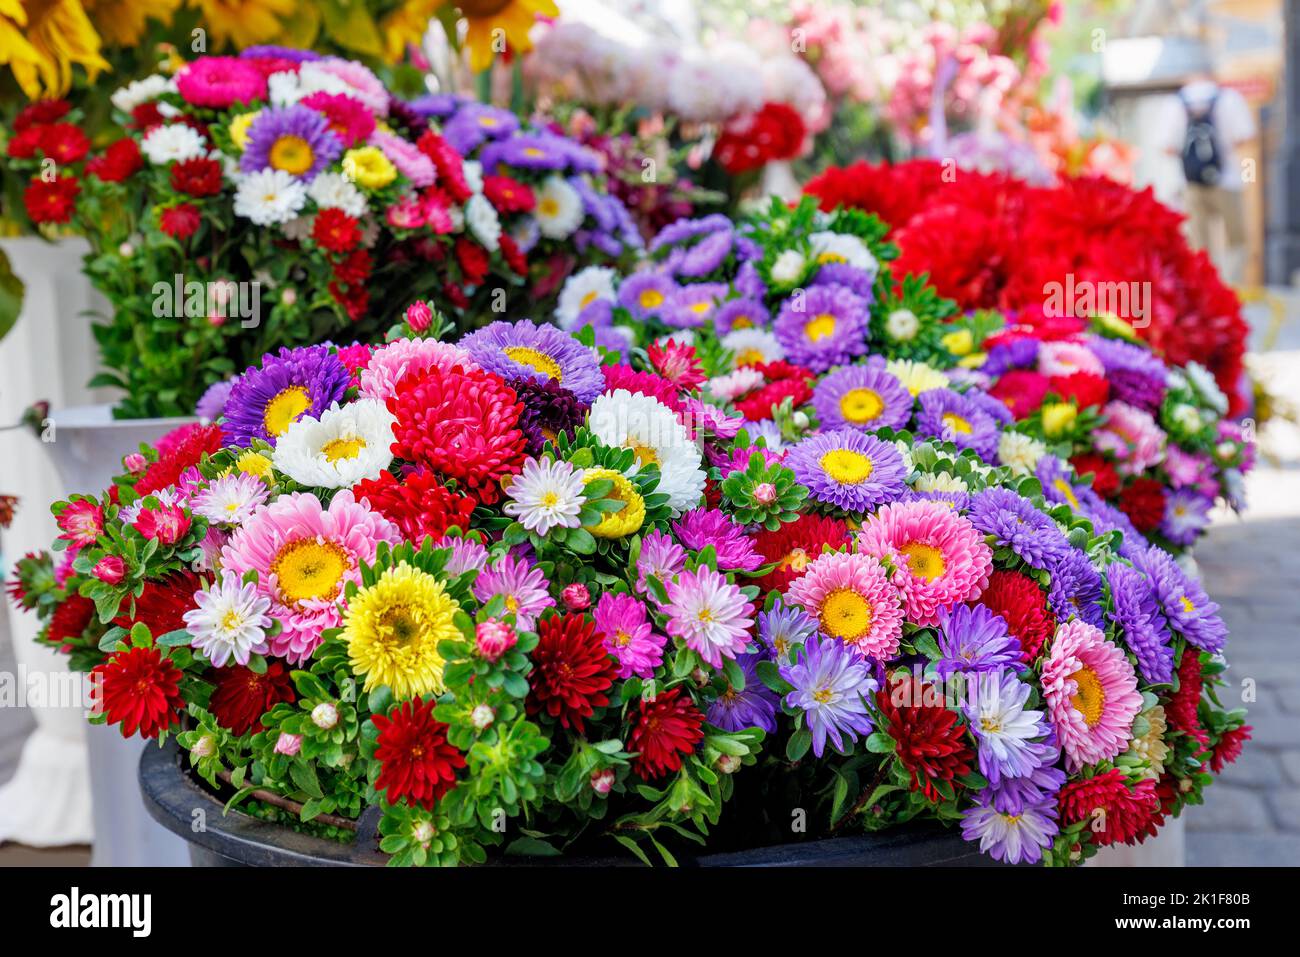 A bouquet of fresh multi-colored chrysanthemums delights the eye with their bright view of the city street in blur. Selective focus, close-up. Stock Photo